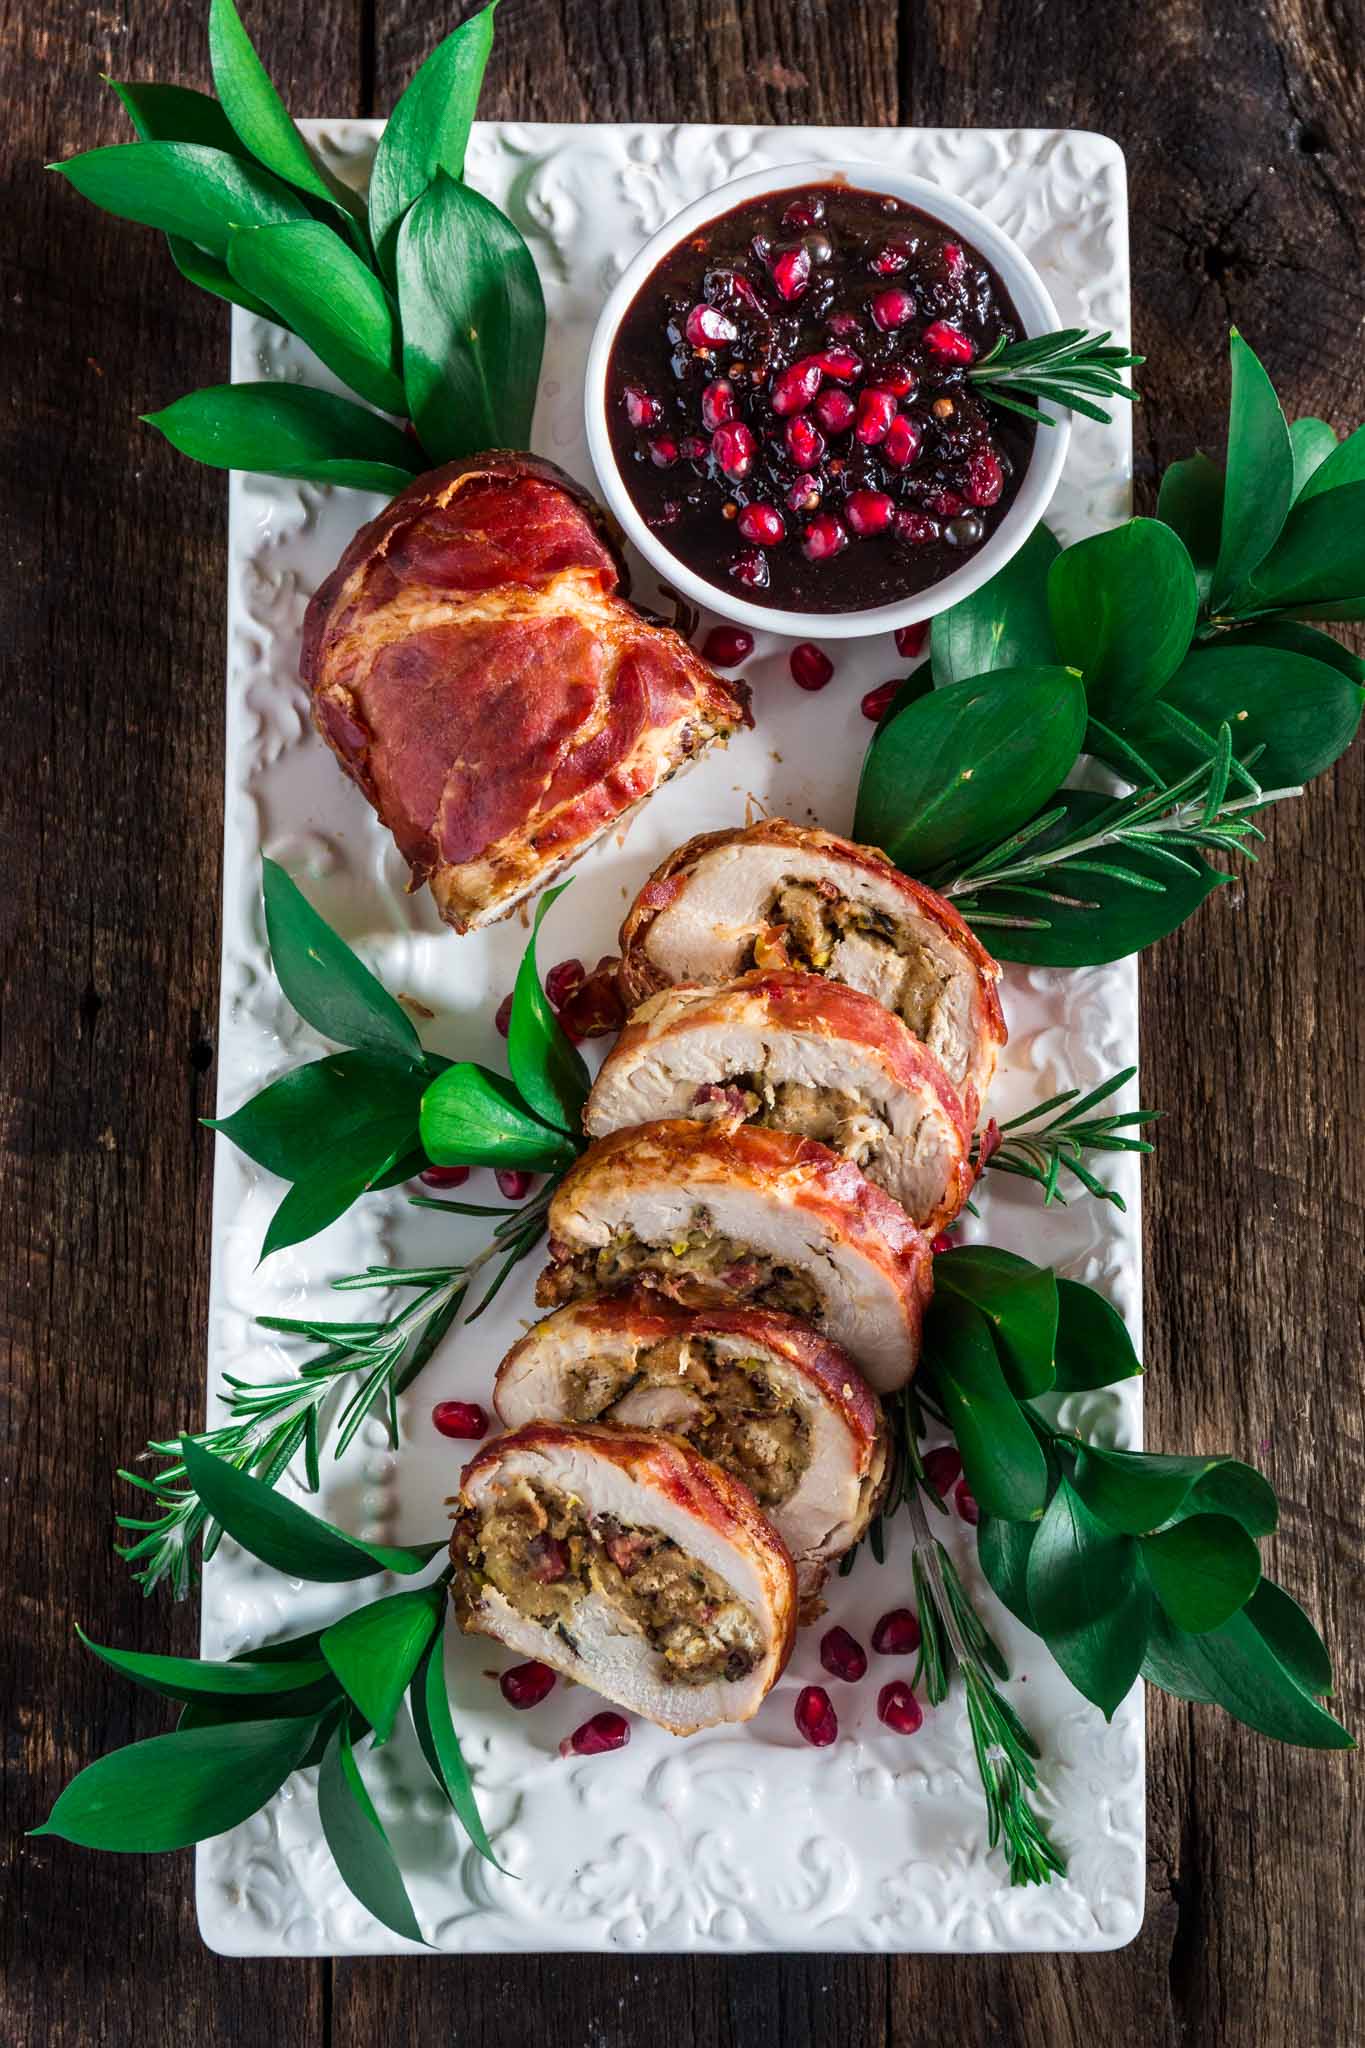 Prosciutto Wrapped Turkey Roulade with Pomegranate-Port Reduction Sauce | www.oliviascuisine.com | No time to roast a whole turkey? Knock the socks off your guests with this simple and quick to assemble turkey roulade. Moist, stuffed with pancetta, pistachio and cranberries, wrapped in Prosciutto di Parma and served with a lip-smacking pomegranate port reduction sauce. One bite and the holidays will never be the same again!